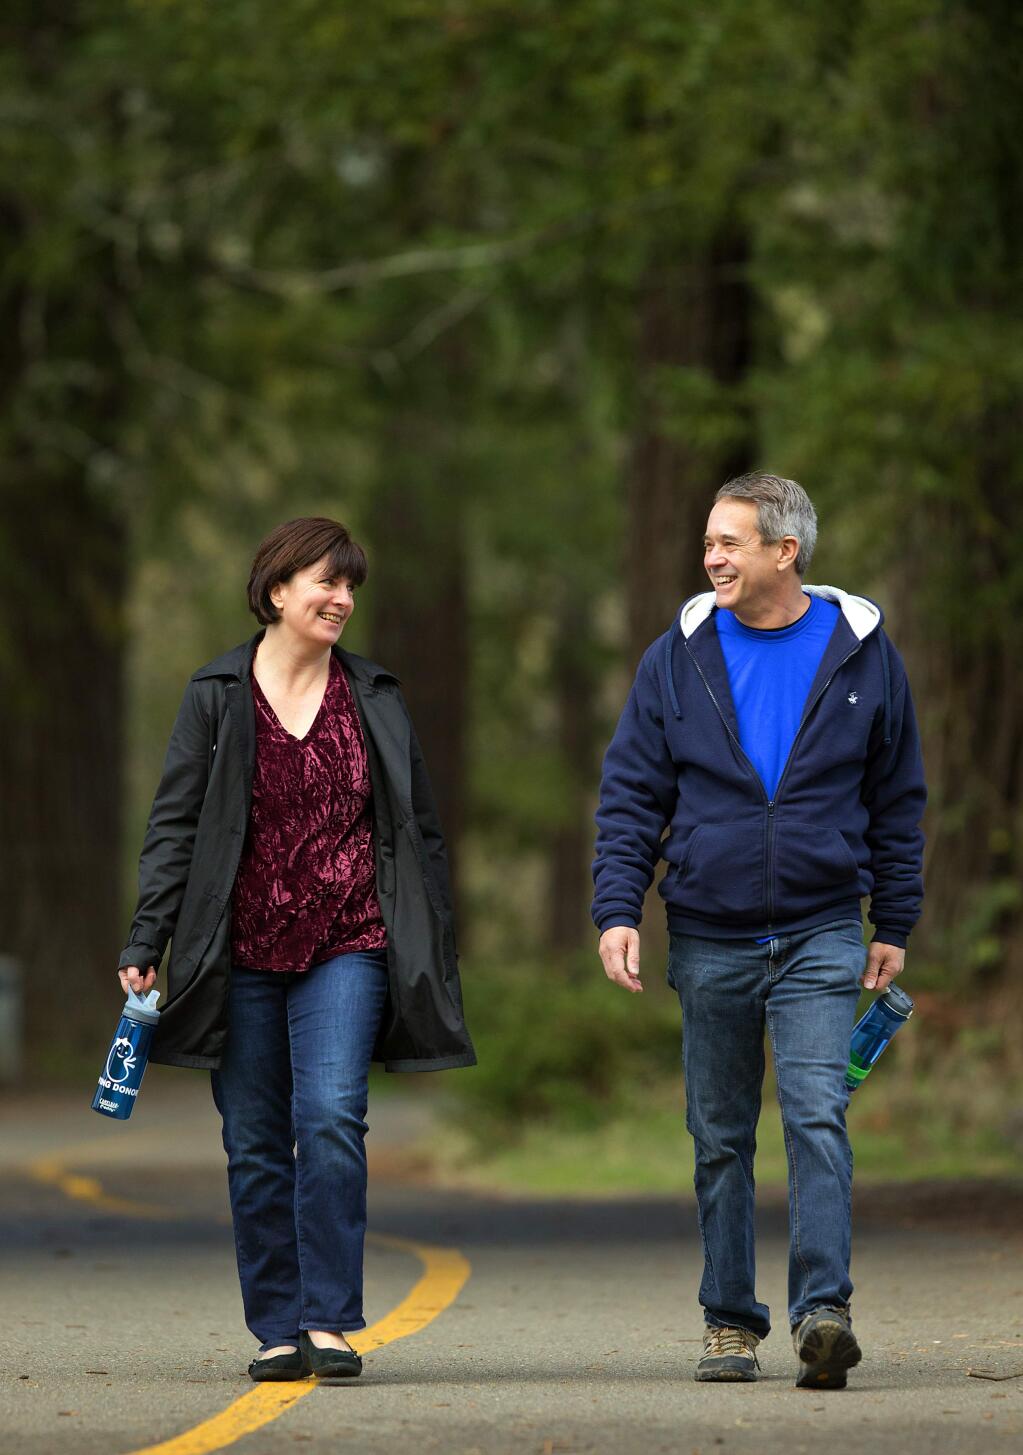 Taunya Moore, left, of Cotati resolved years ago to donate a kidney to someone whose life or quality of life depended on a transplant. Richard Lazovick of Santa Rosa was the recipient in January and walks around Spring Lake to regain his strength. (photo by John Burgess/The Press Democrat)